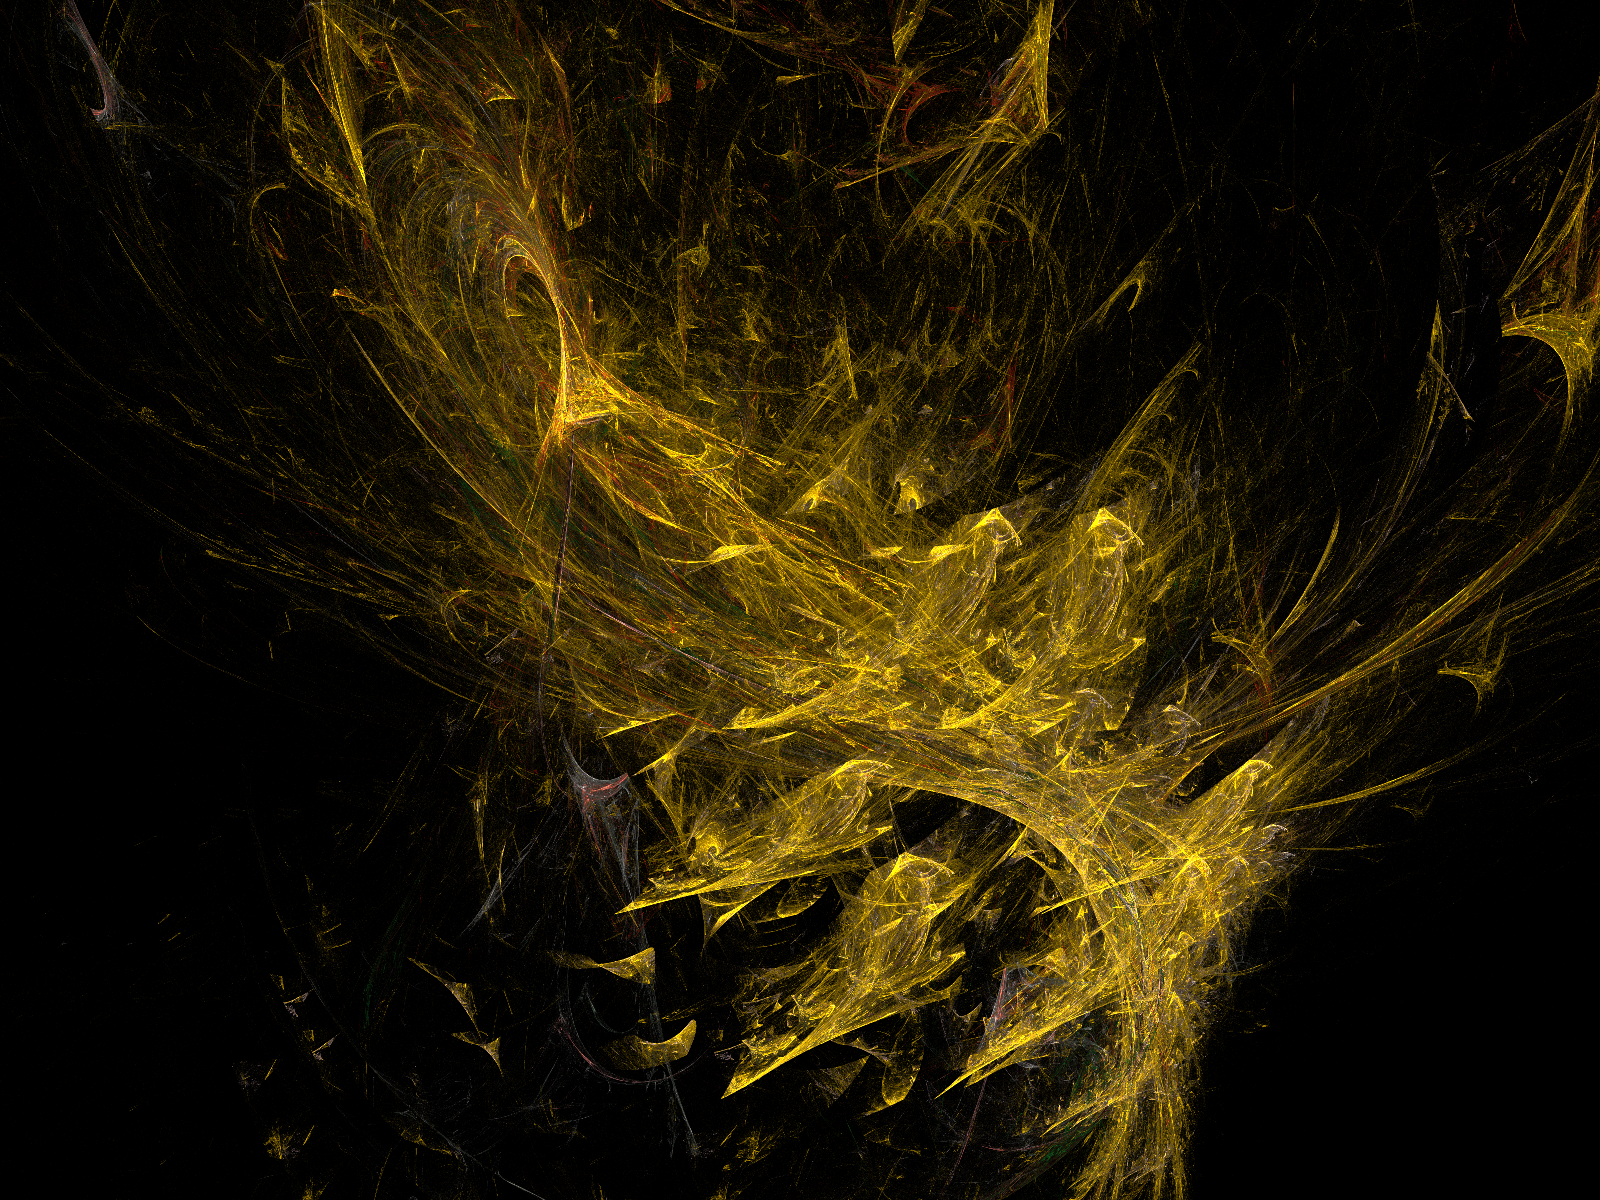 black background free hd download Yellow And Black Background Free